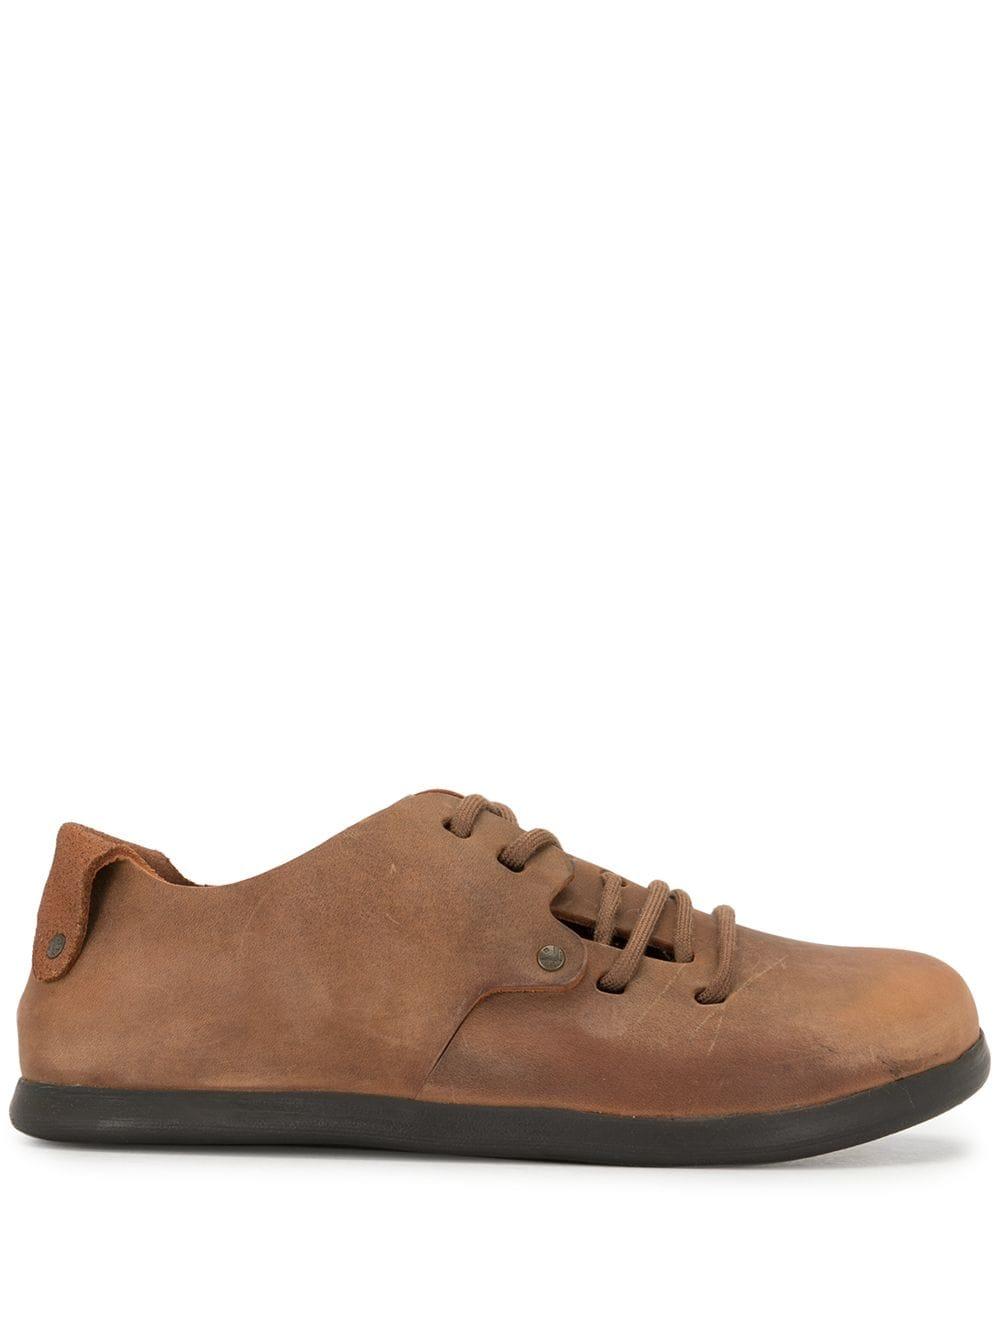 Birkenstock Montana Nl Lace-up Shoes in Brown | Lyst